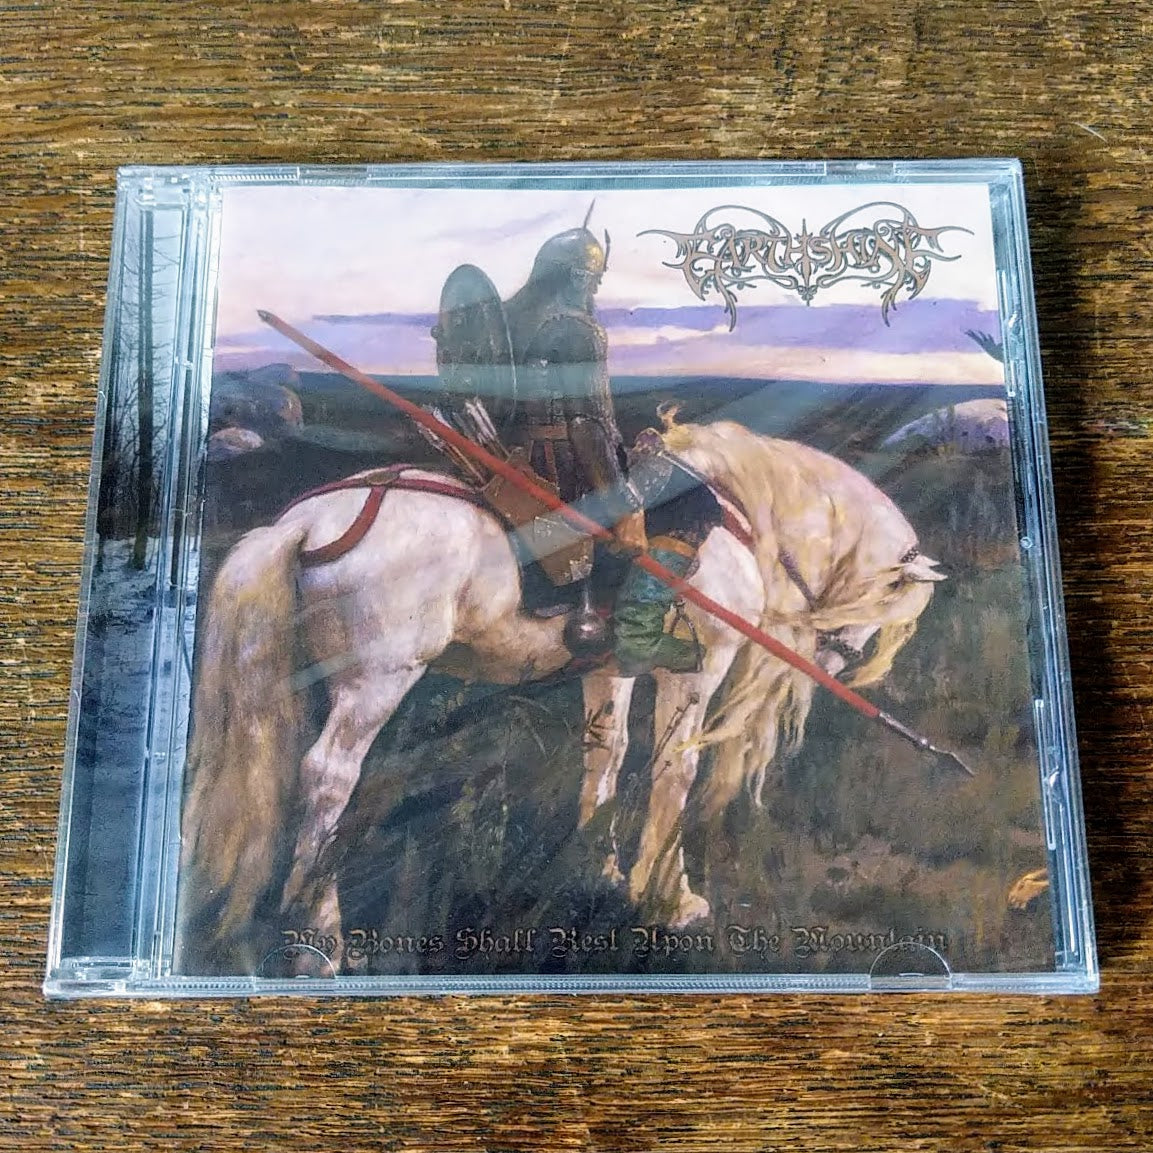 [SOLD OUT] EARTHSHINE "My Bones Shall Rest Upon the Mountain" CD